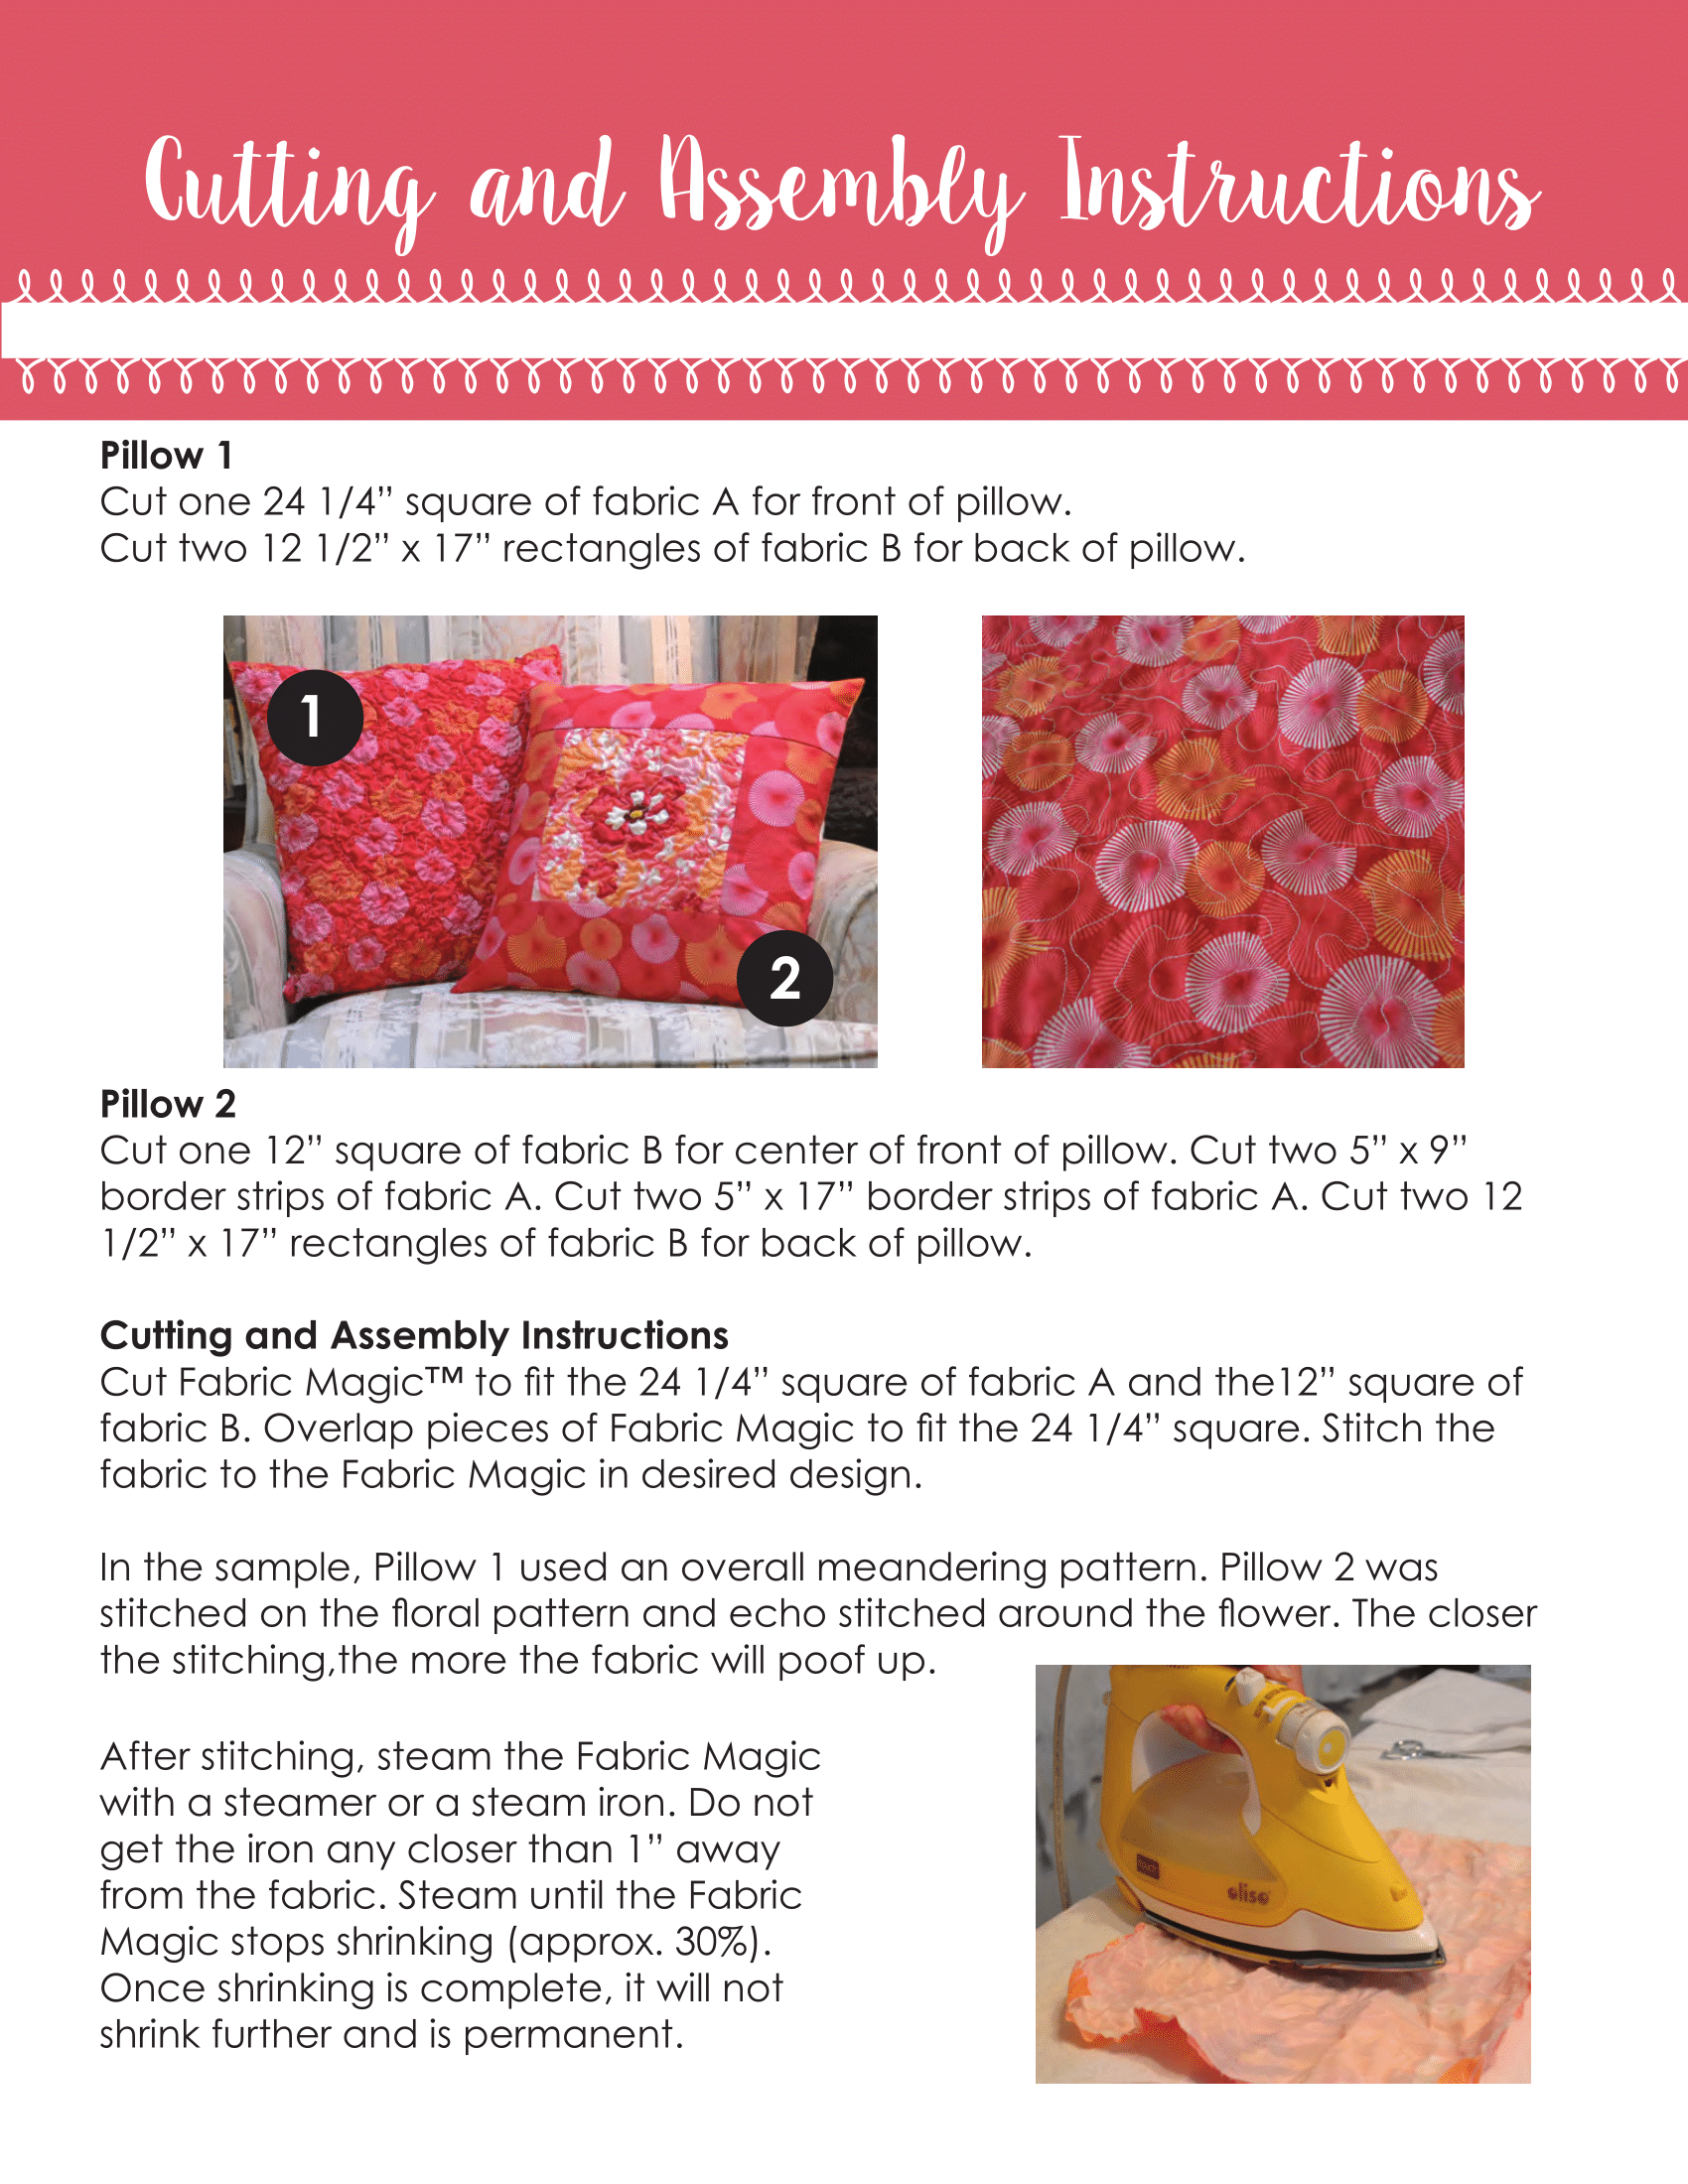 Cutting & assembly steps to create your pocket pillow